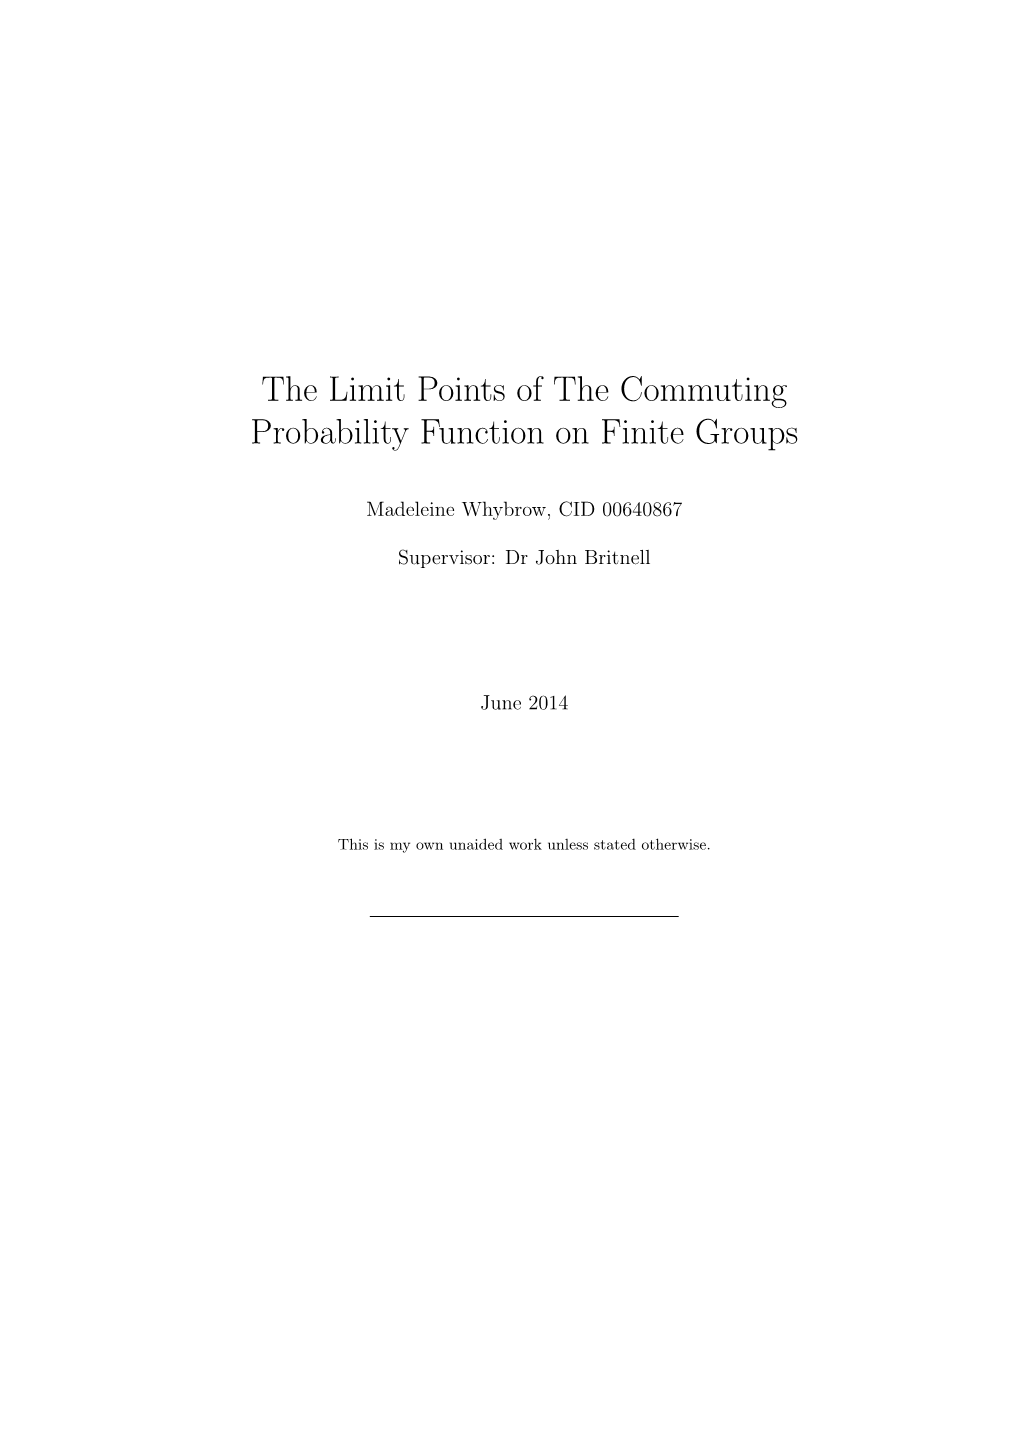 The Limit Points of the Commuting Probability Function on Finite Groups